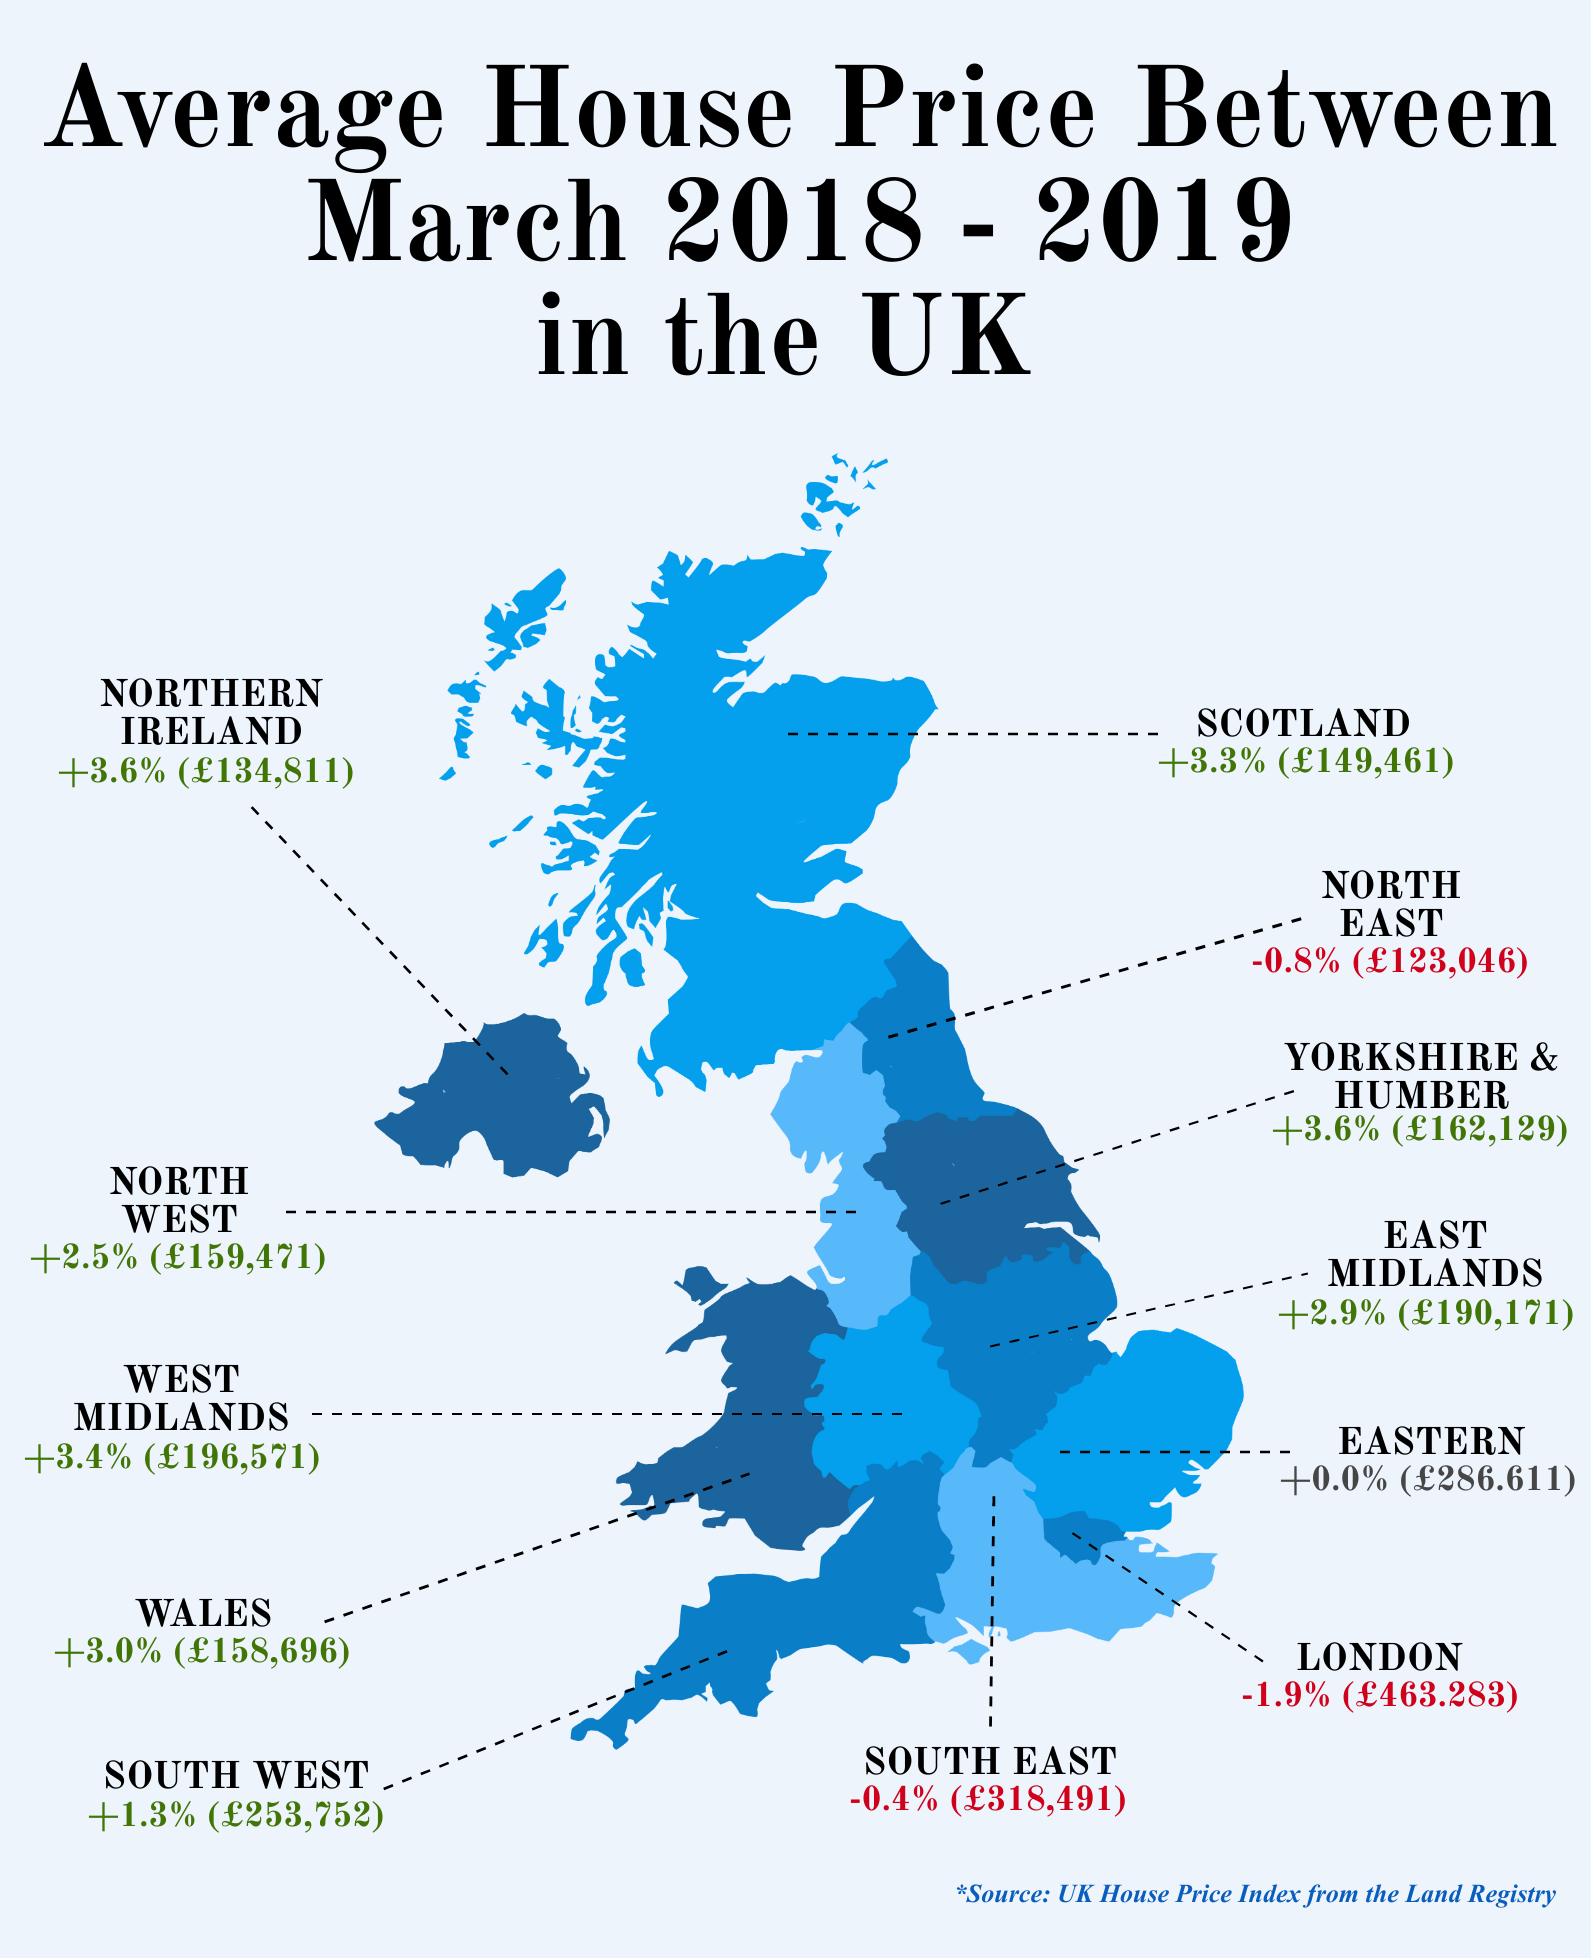 Average House Price Between March 2018-2019 in the UK